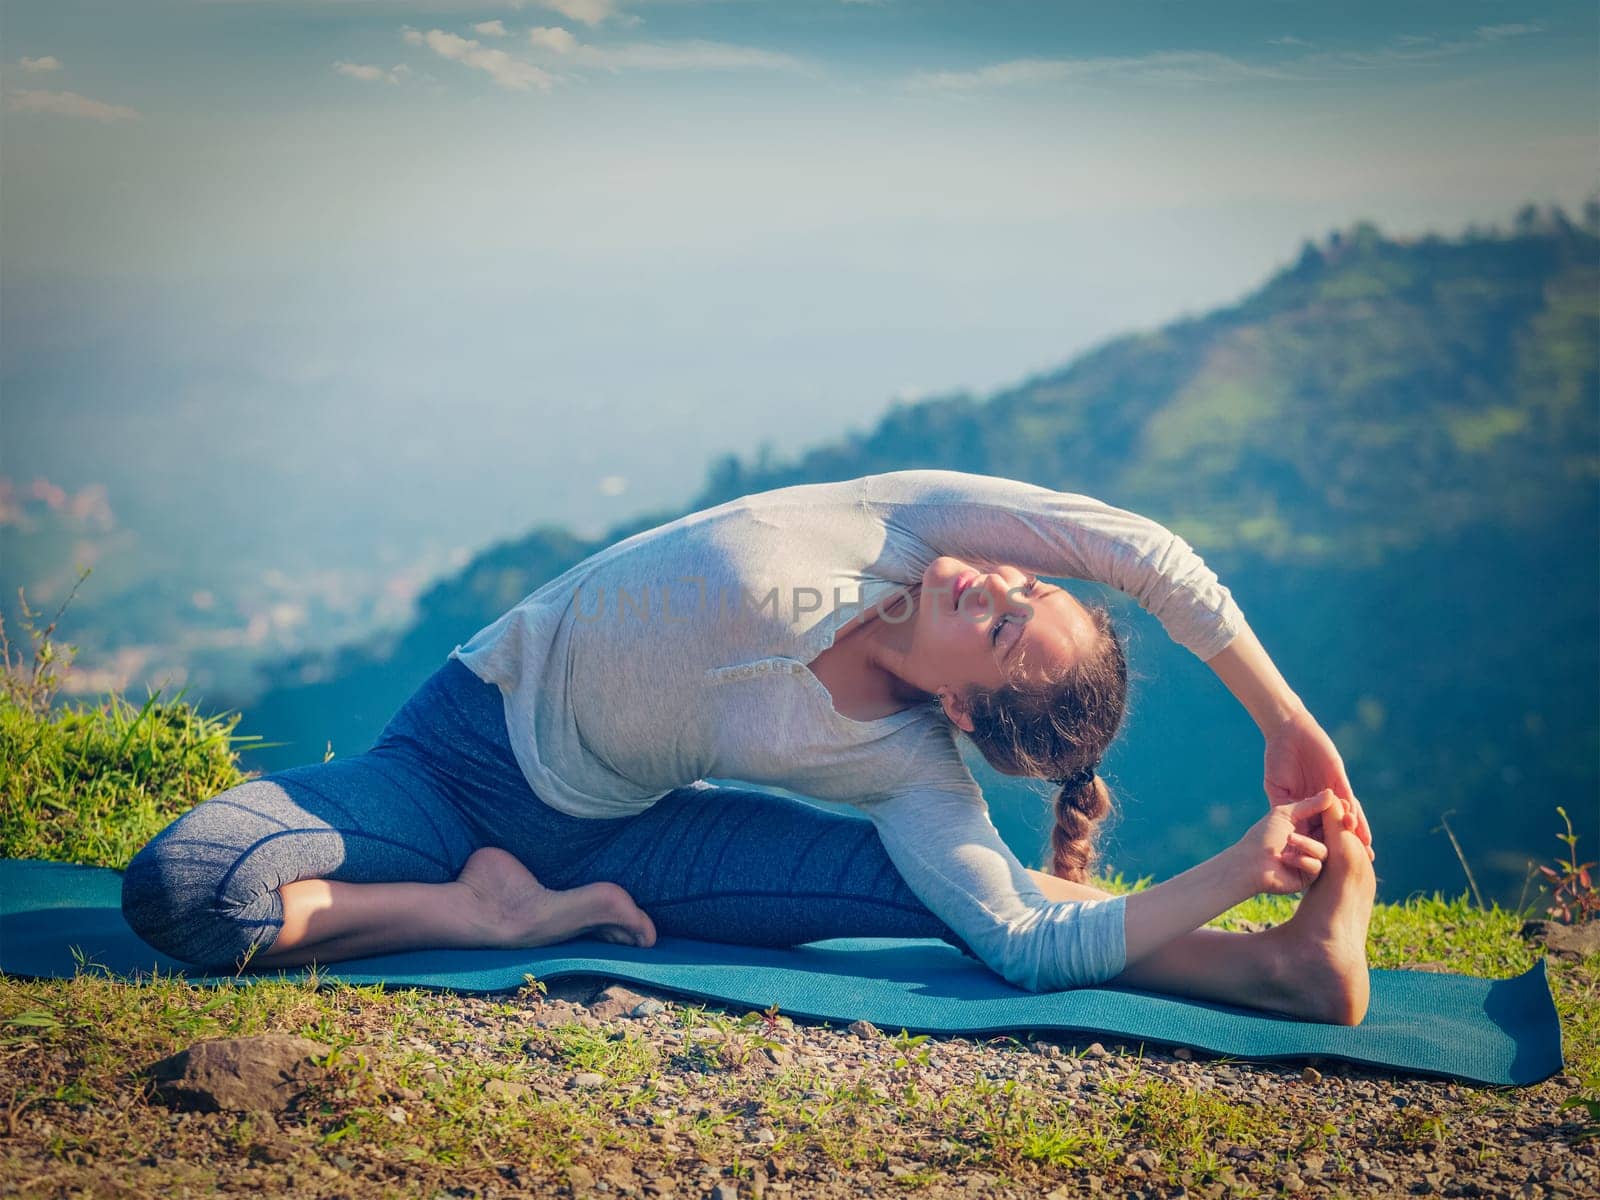 Yoga outdoors - young sporty fit woman doing Hatha Yoga asana parivritta janu sirsasana - Revolved Head-to-Knee Pose - in mountains in the morning. Vintage retro effect filtered hipster style image.